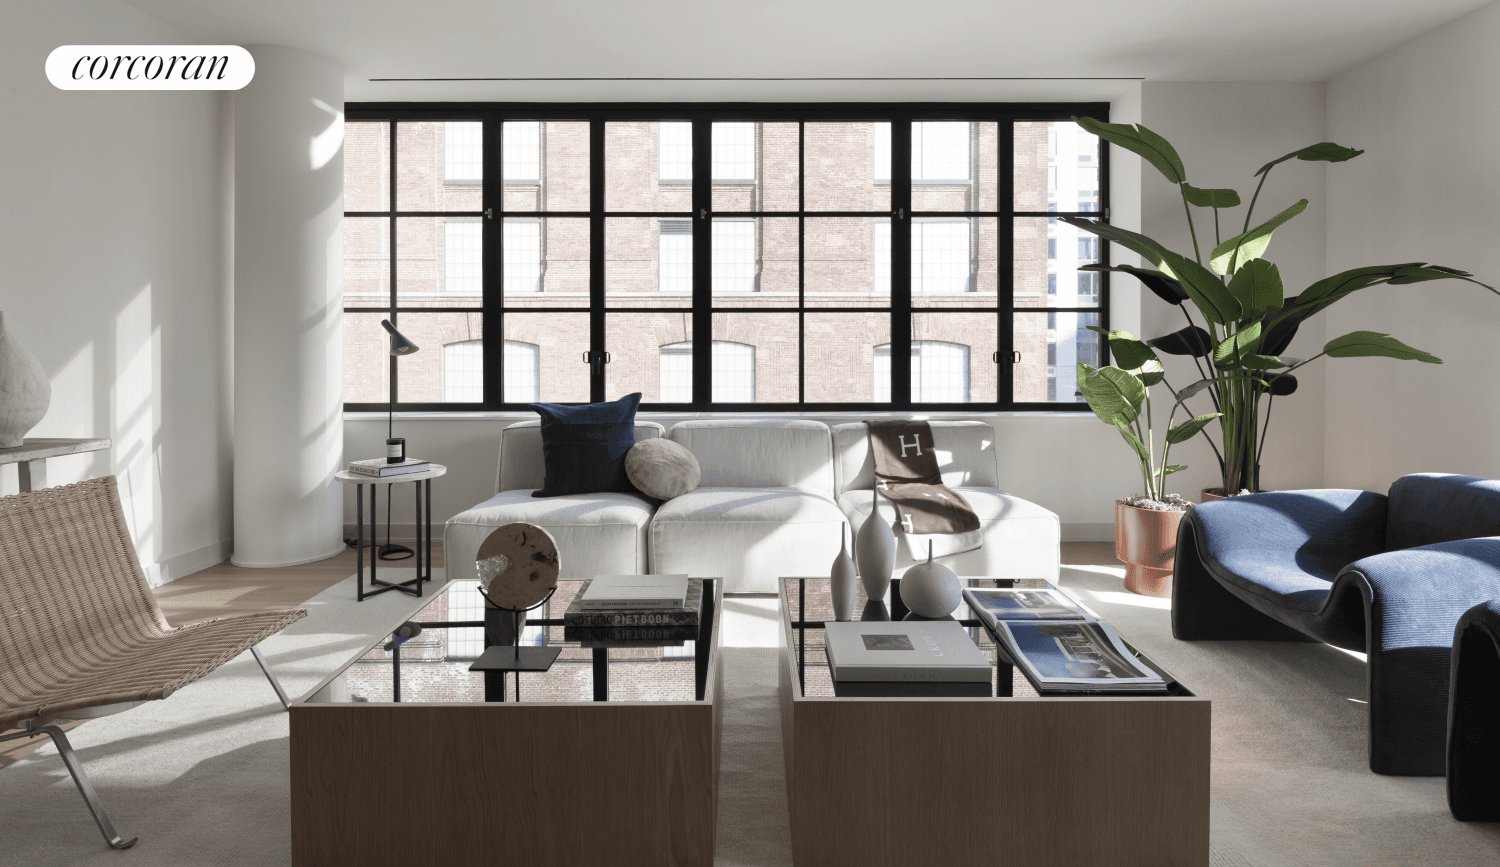 Introducing Five Five Zero, a new West Chelsea condominium boasting 19 exceptional 3 and 4 bedroom units of unparalleled craftsmanship.